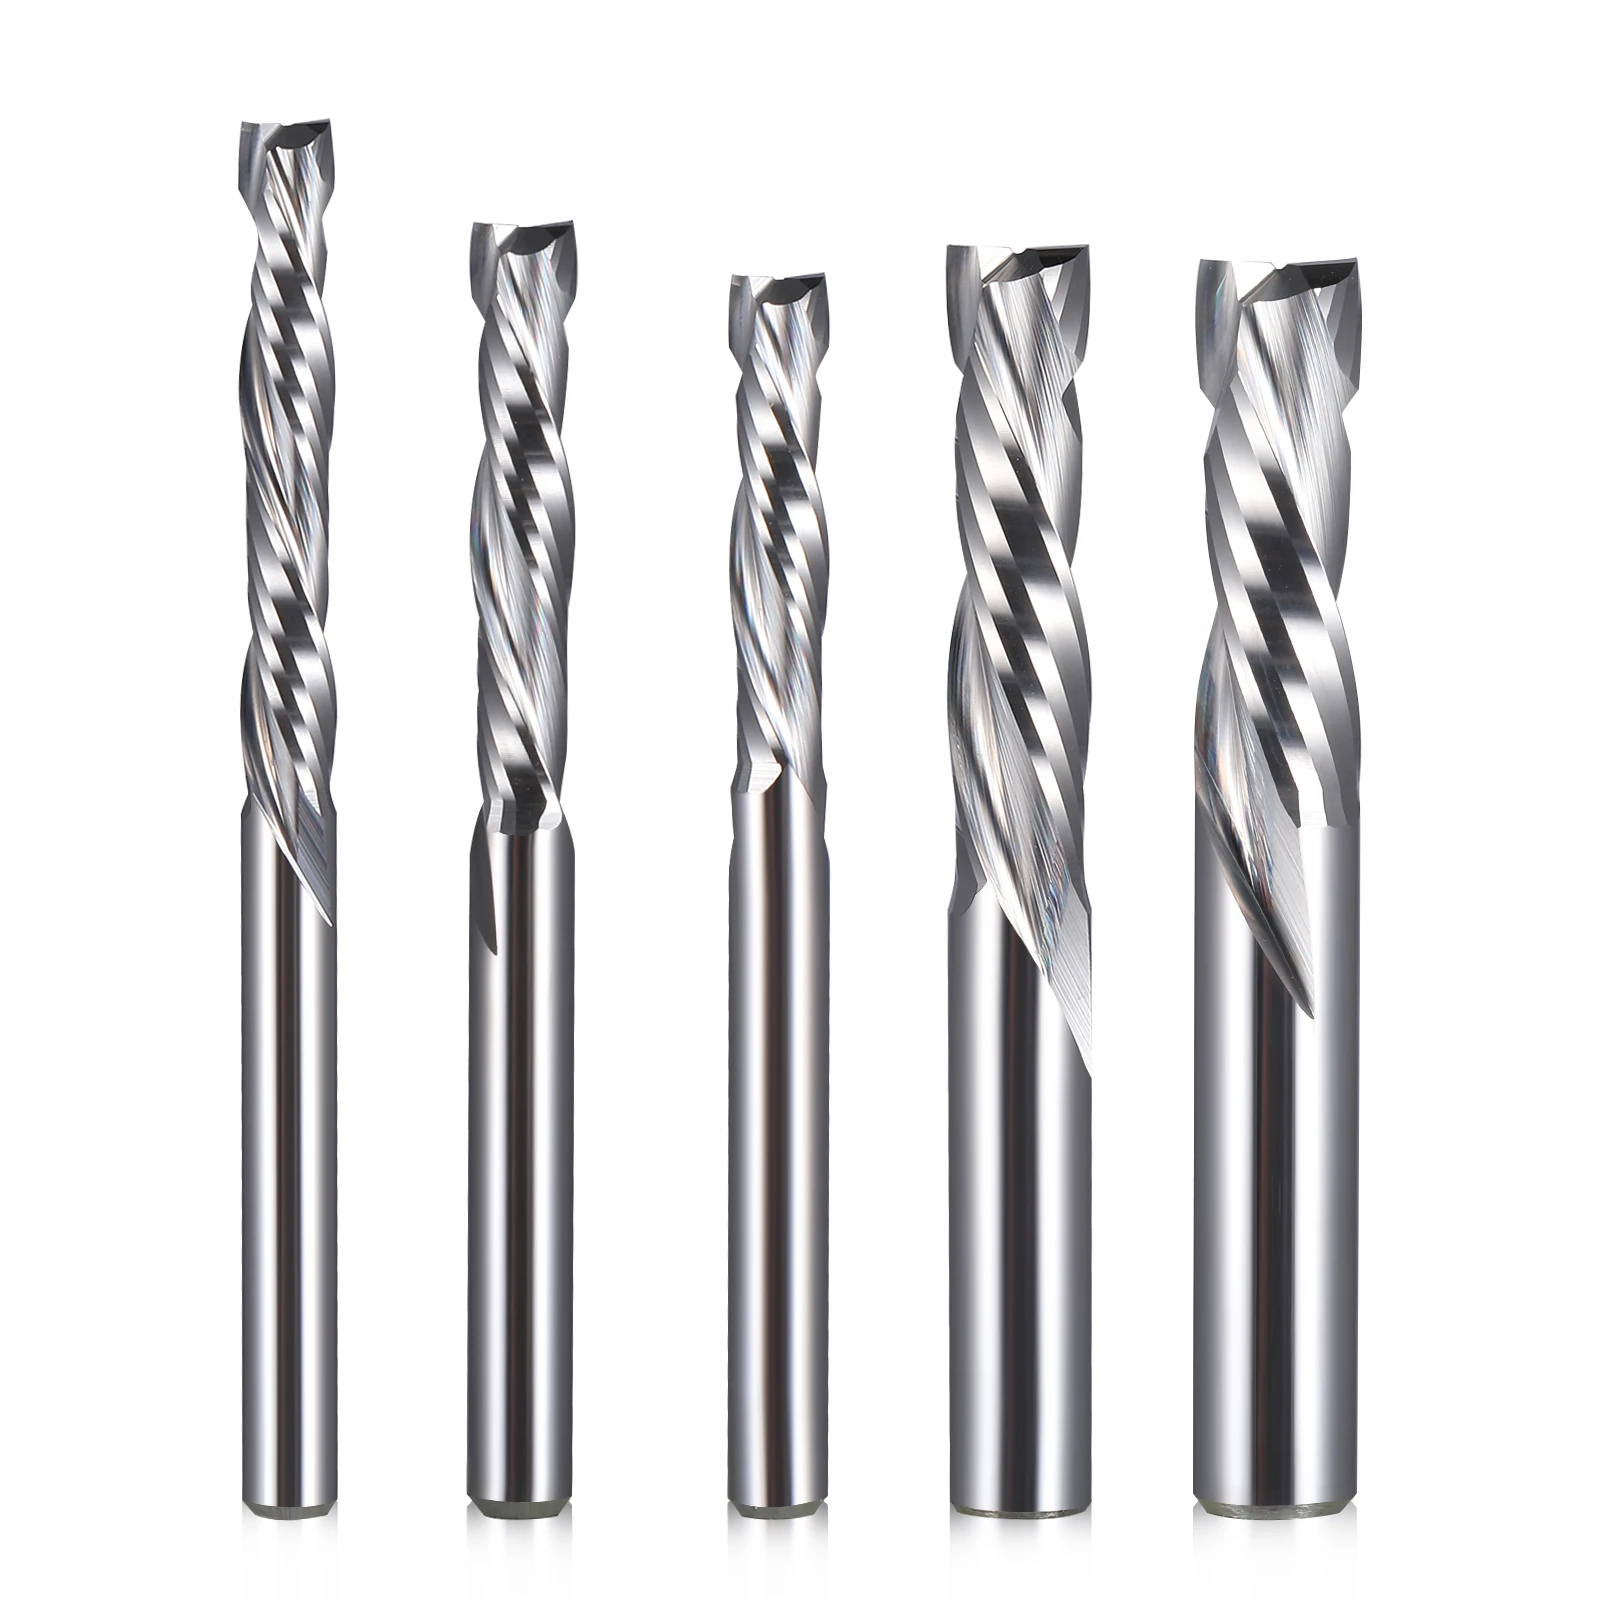 1Pcs UP & DOWN Cut Two Flutes Spiral Carbide Mill Tool Cutters for CNC Router, Compression Wood End Mill Cutter Bits